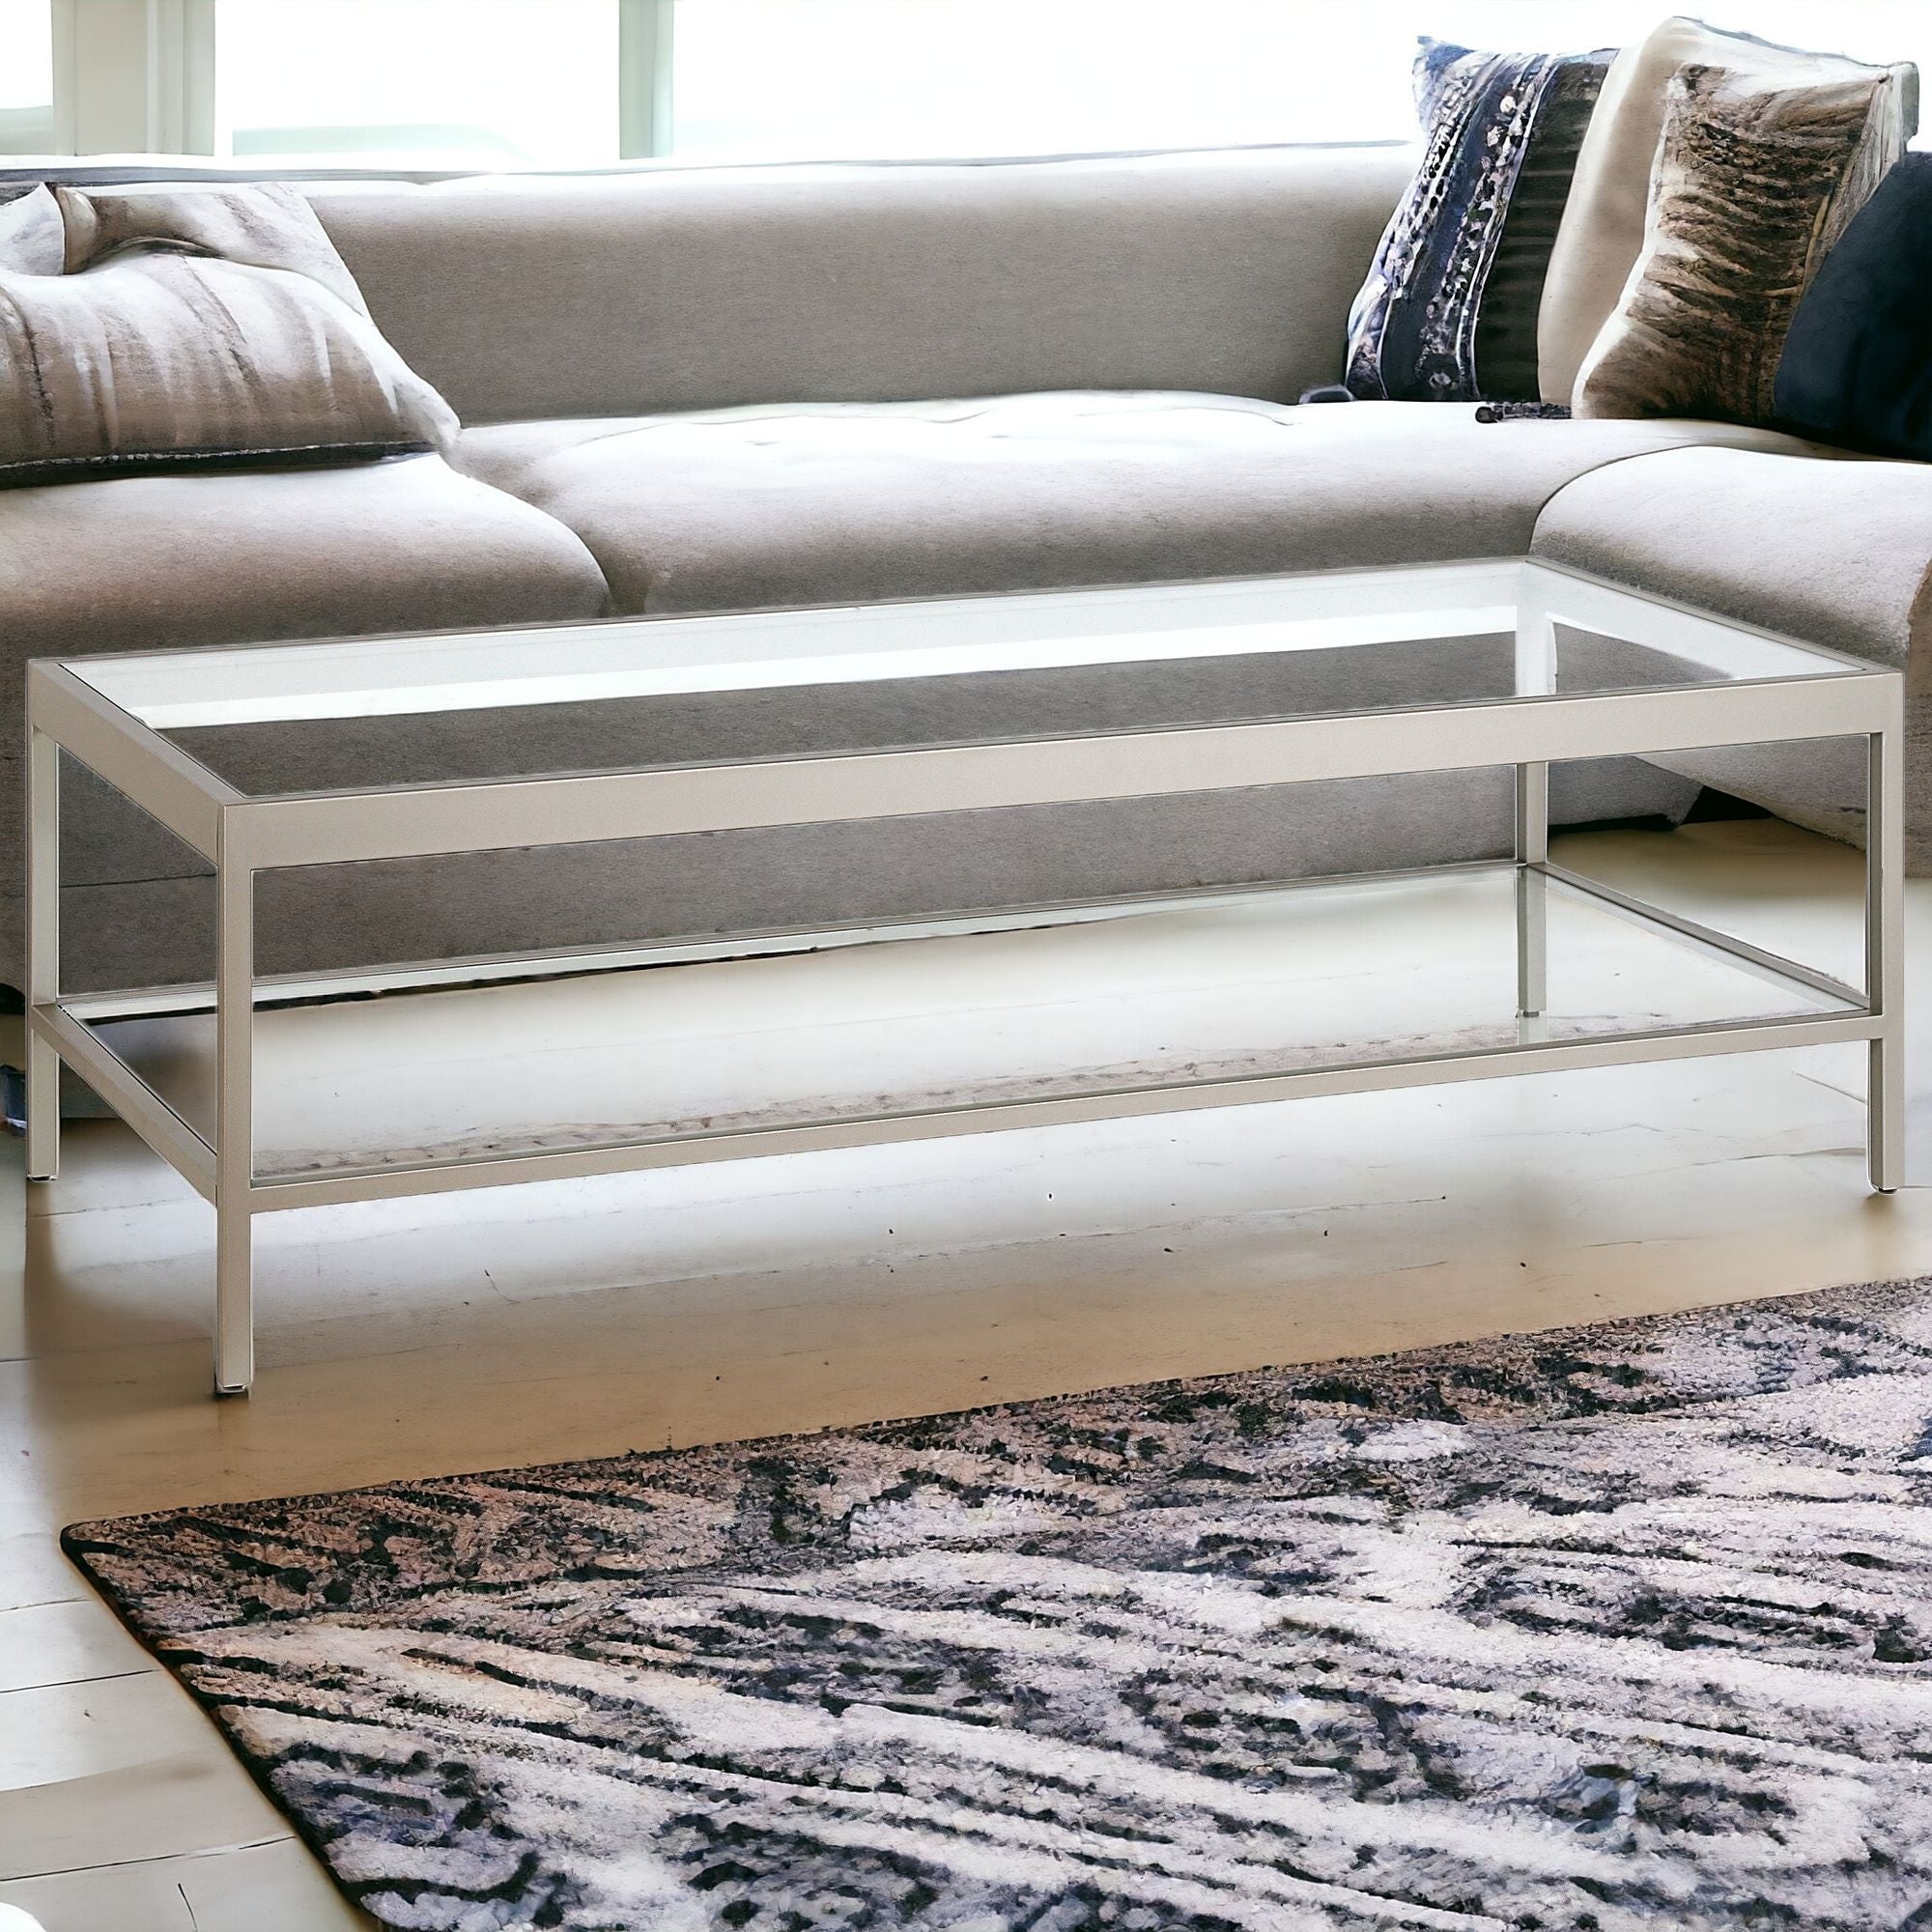 54" Silver Glass And Steel Coffee Table With Shelf